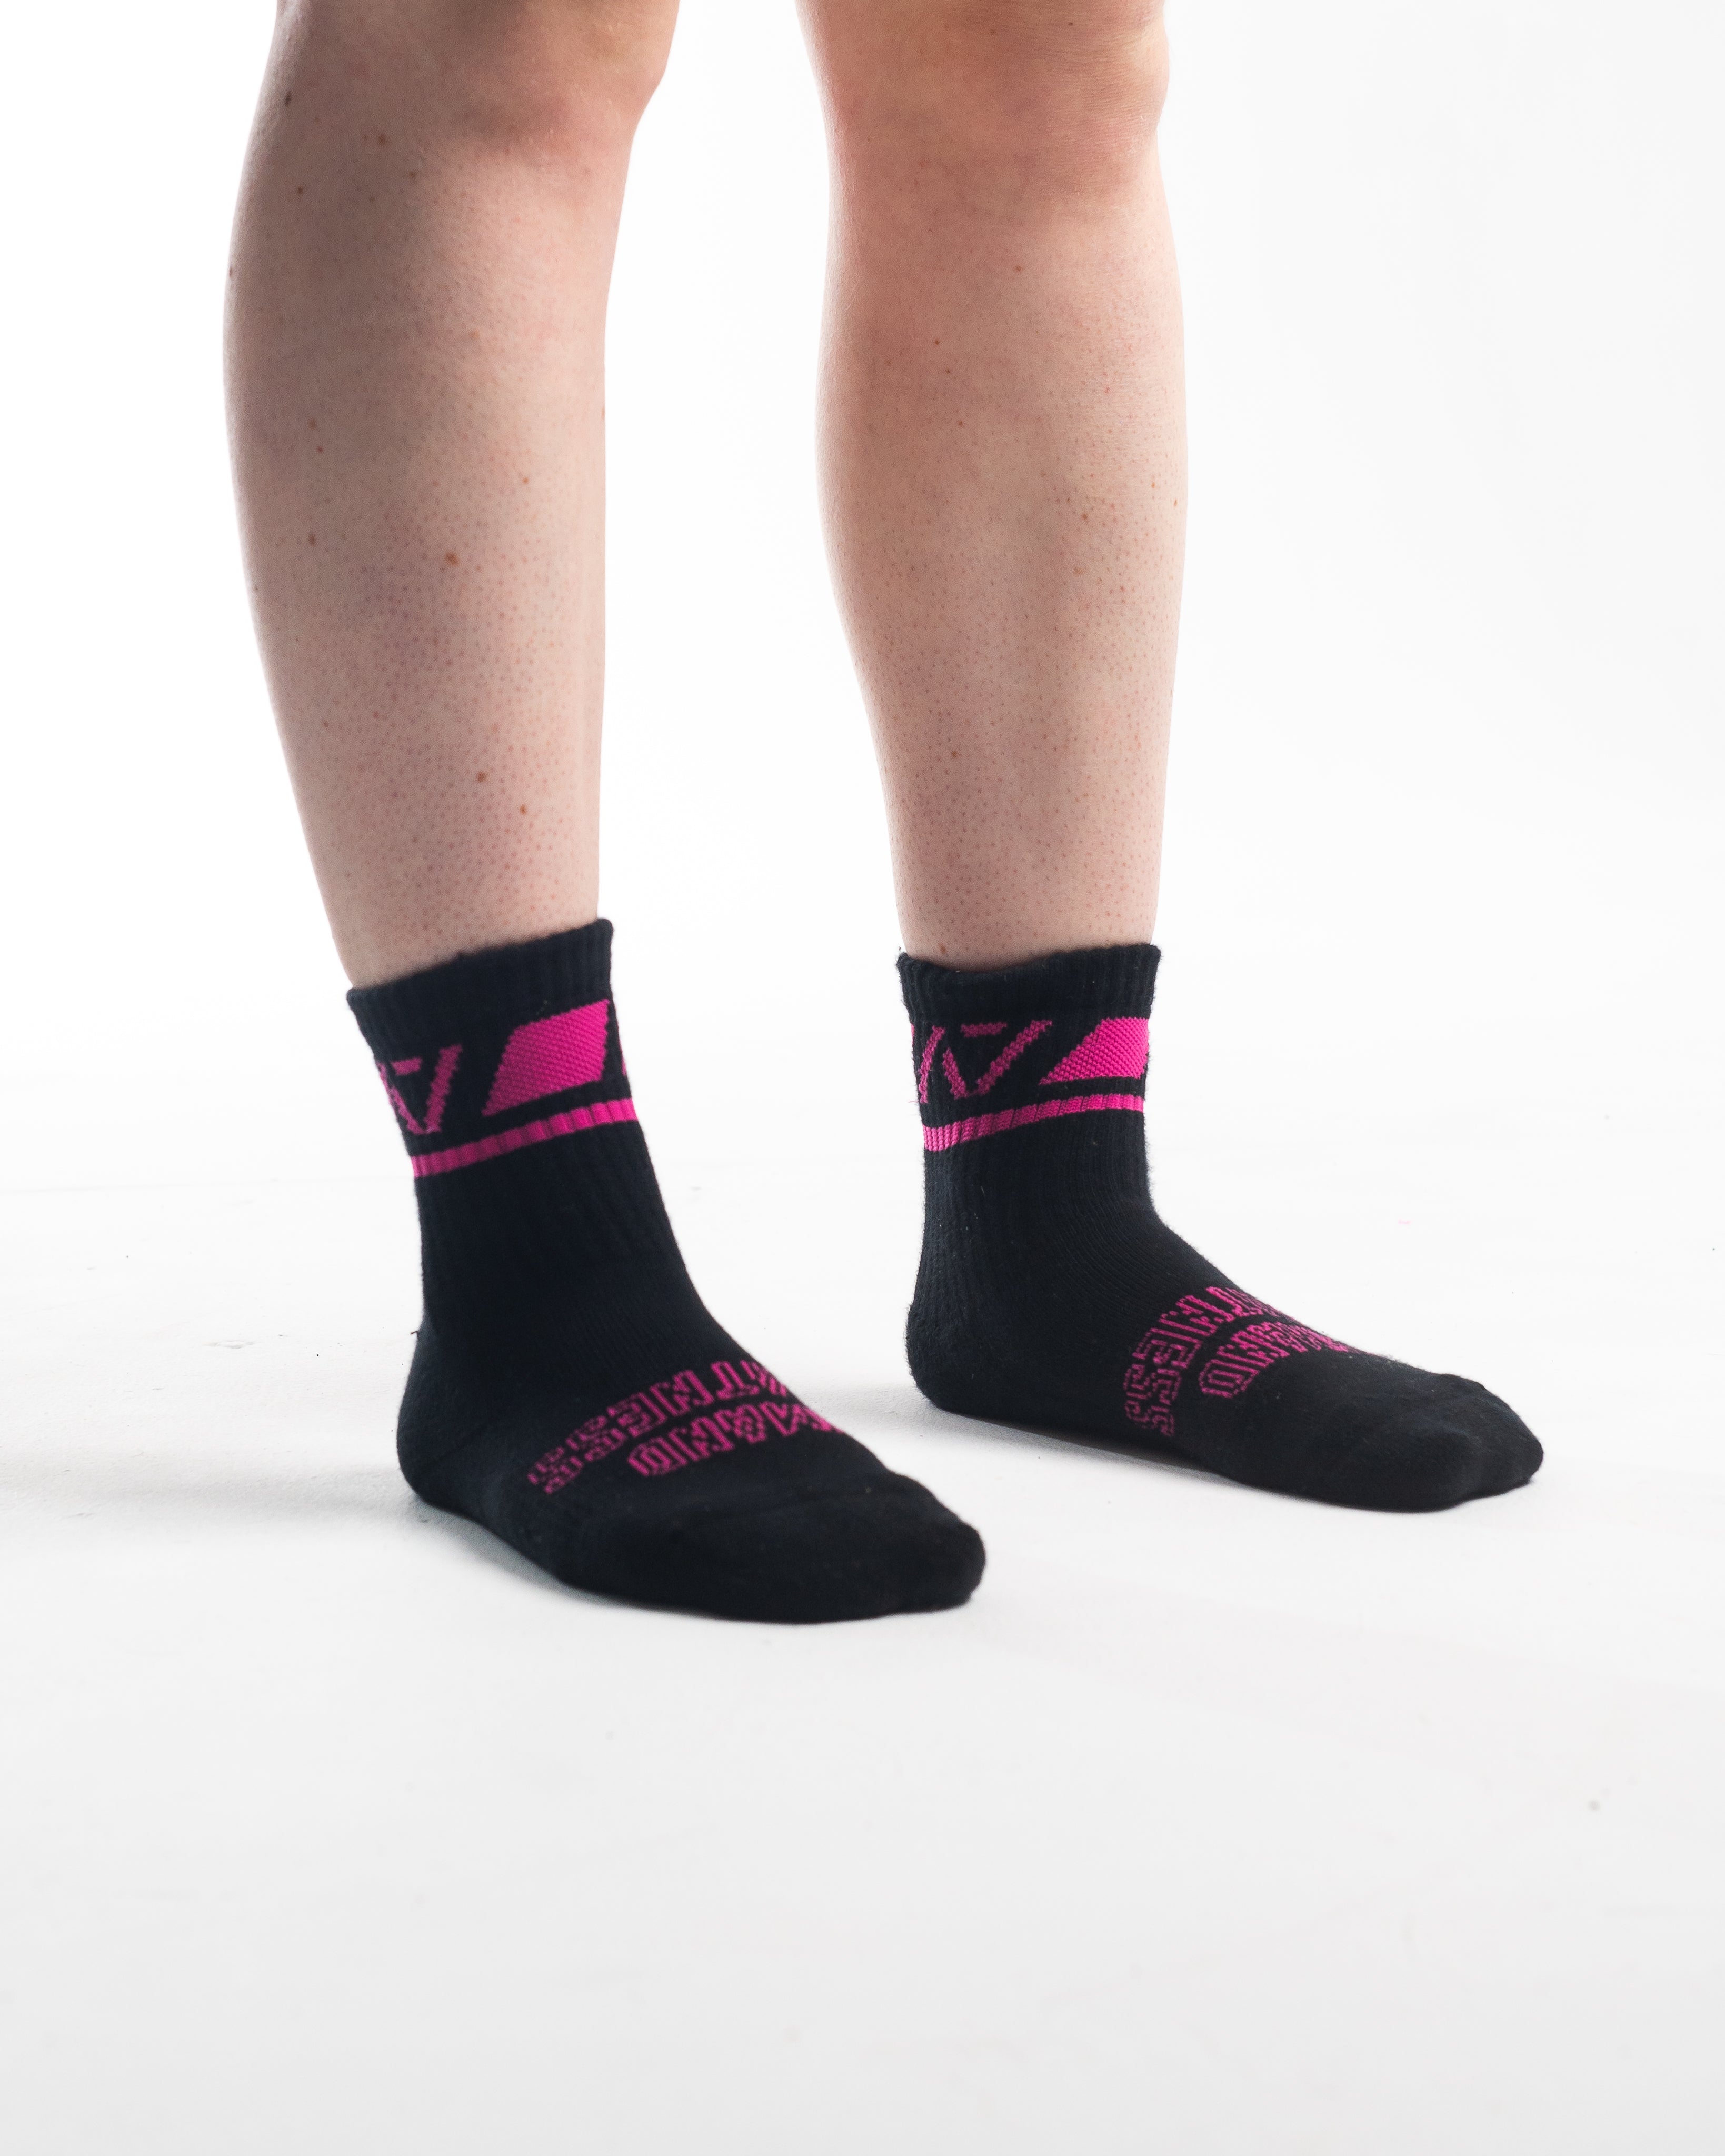 A7 Flamingo Crew socks showcase pink logos to let your energy show on the platform, in your training or while out and about. The IPF Approved Shadow Stone Meet Kit includes Powerlifting Singlet, A7 Meet Shirt, A7 Zebra Wrist Wraps, A7 Deadlift Socks, Hourglass Knee Sleeves (Stiff Knee Sleeves and Rigor Mortis Knee Sleeves). Genouillères powerlifting shipping to France, Spain, Ireland, Germany, Italy, Sweden and EU. 